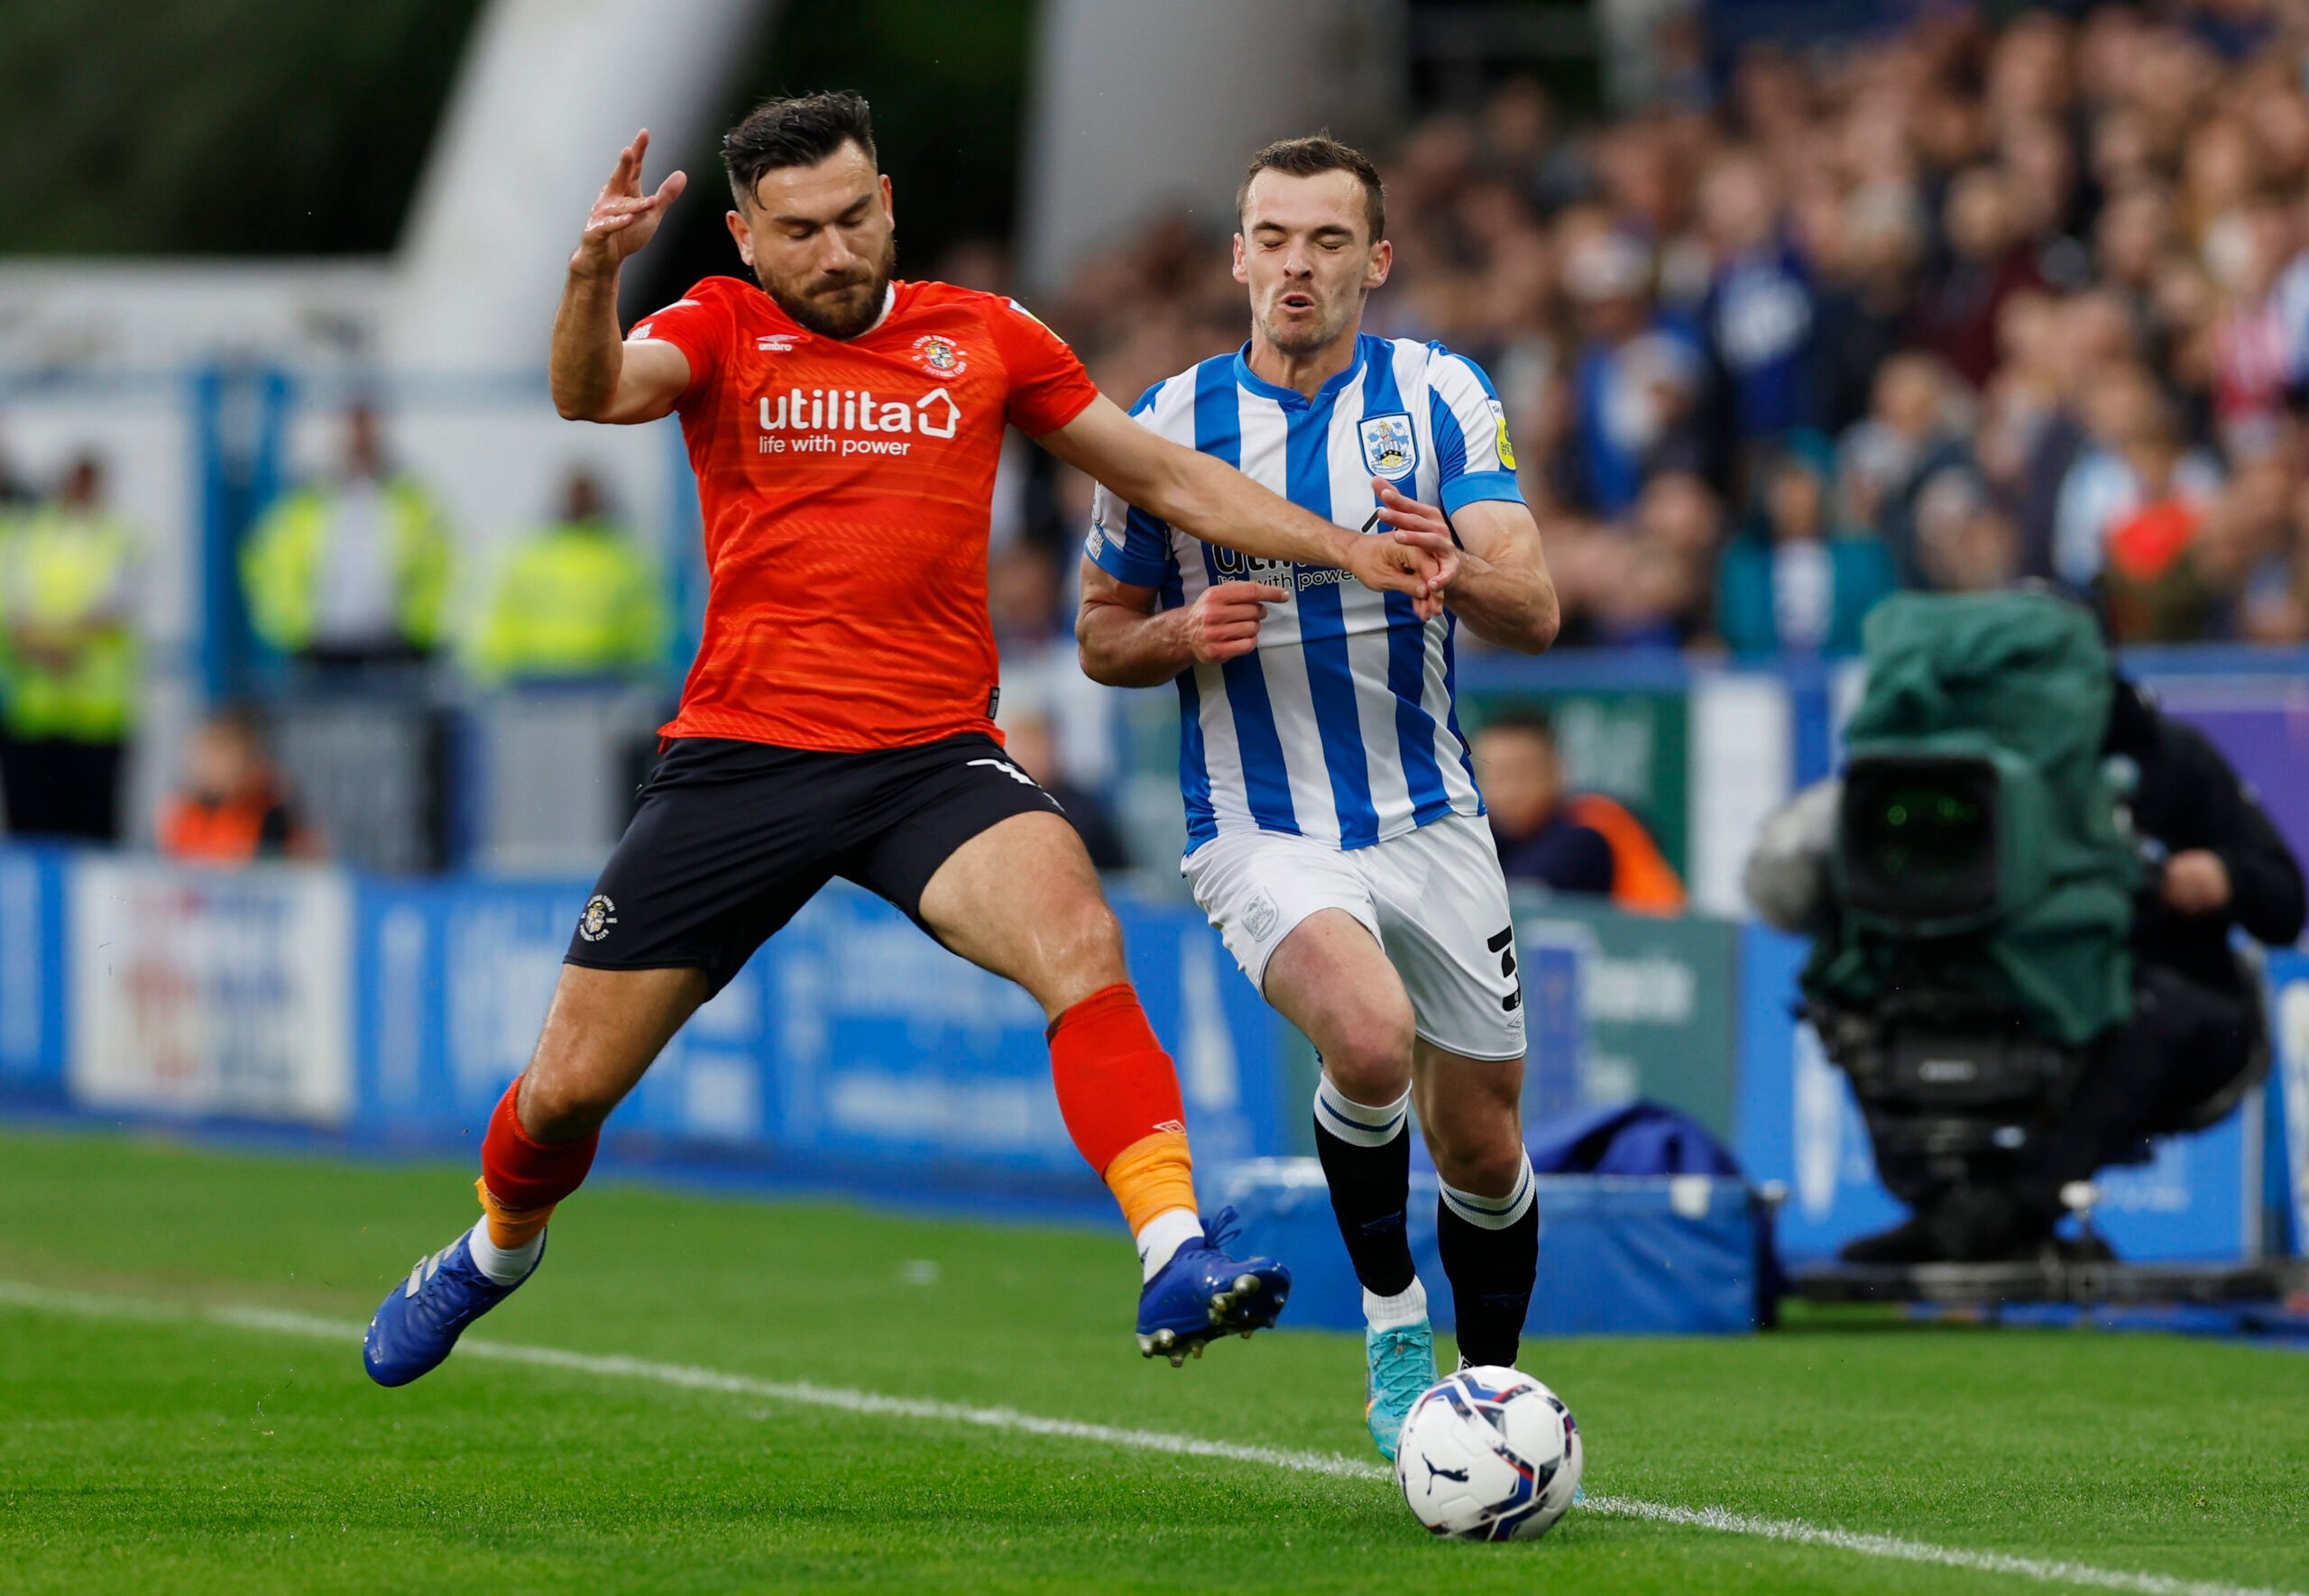 Soccer Football - Championship - Play-Offs Second Leg - Huddersfield Town v Luton Town - John Smith's Stadium, Huddersfield, Britain - May 16, 2022 Luton Town's Robert Snodgrass in action with Huddersfield Town's Harry Toffolo Action Images via Reuters/Jason Cairnduff